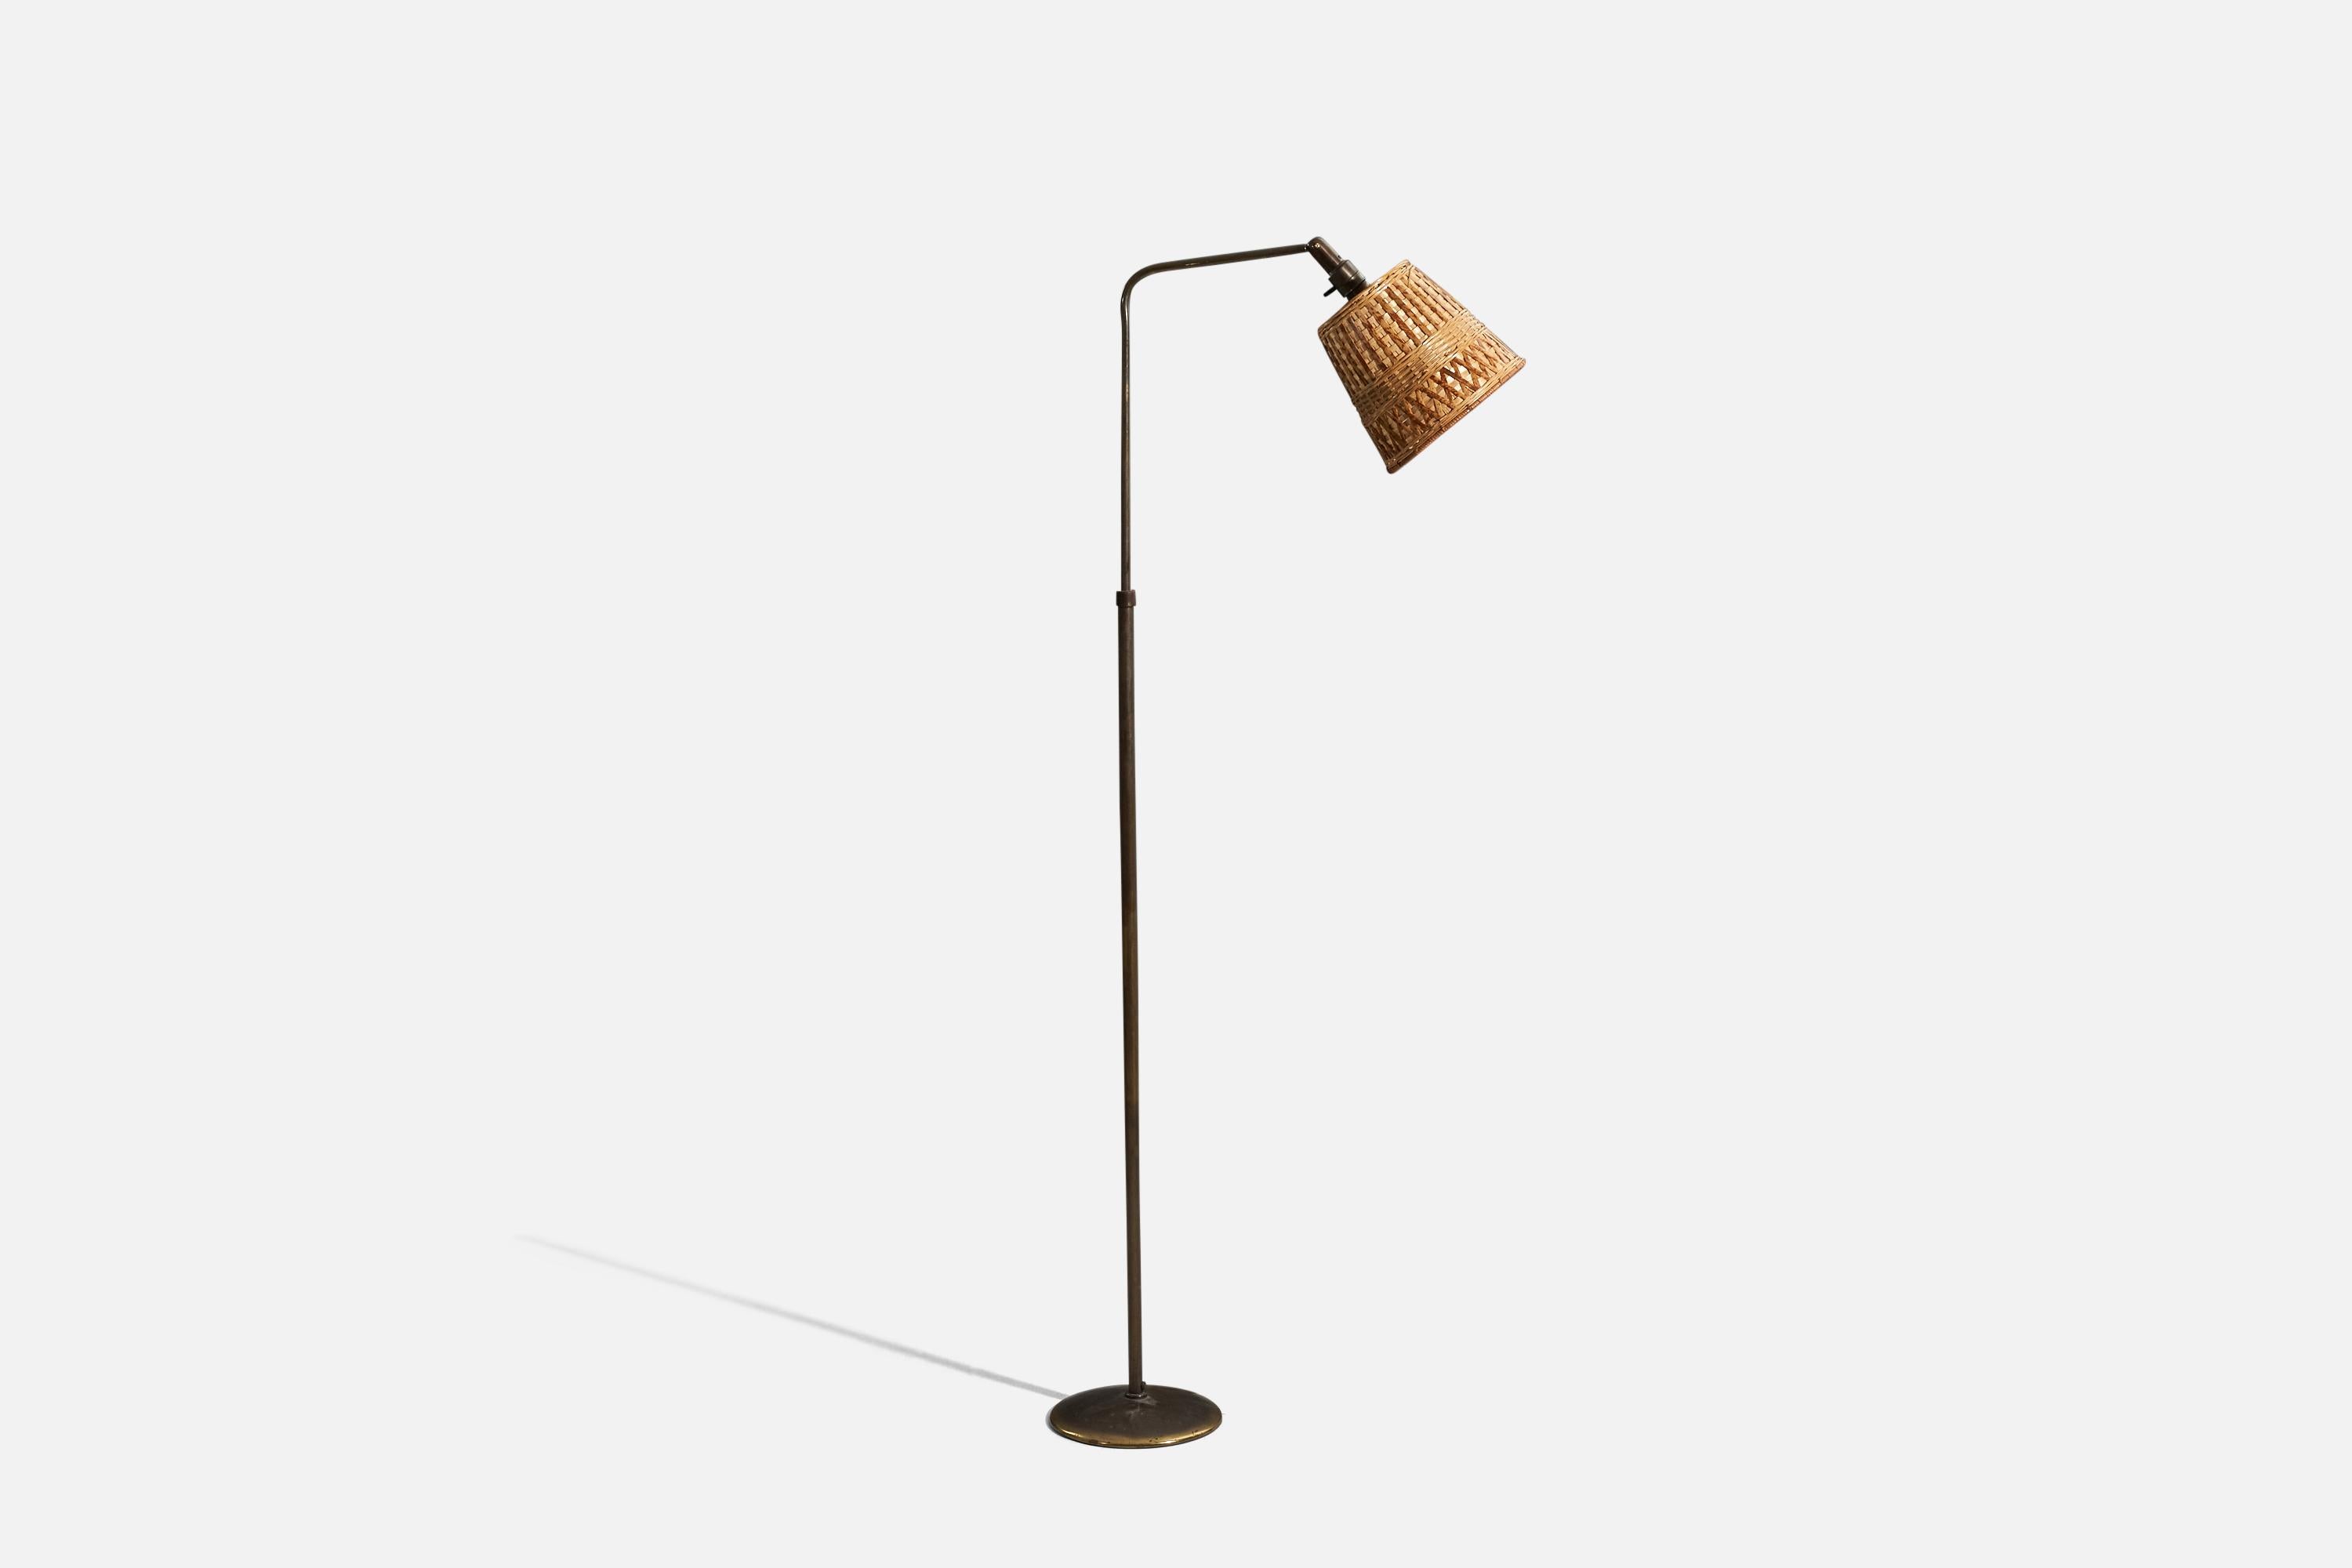 A bronze and rattan floor lamp designed by Sigfried Giedion & Hin Bredendieck
and produced by B.A.G Turgi Bronzewarenfabrik, Switzerland, 1930s. 

